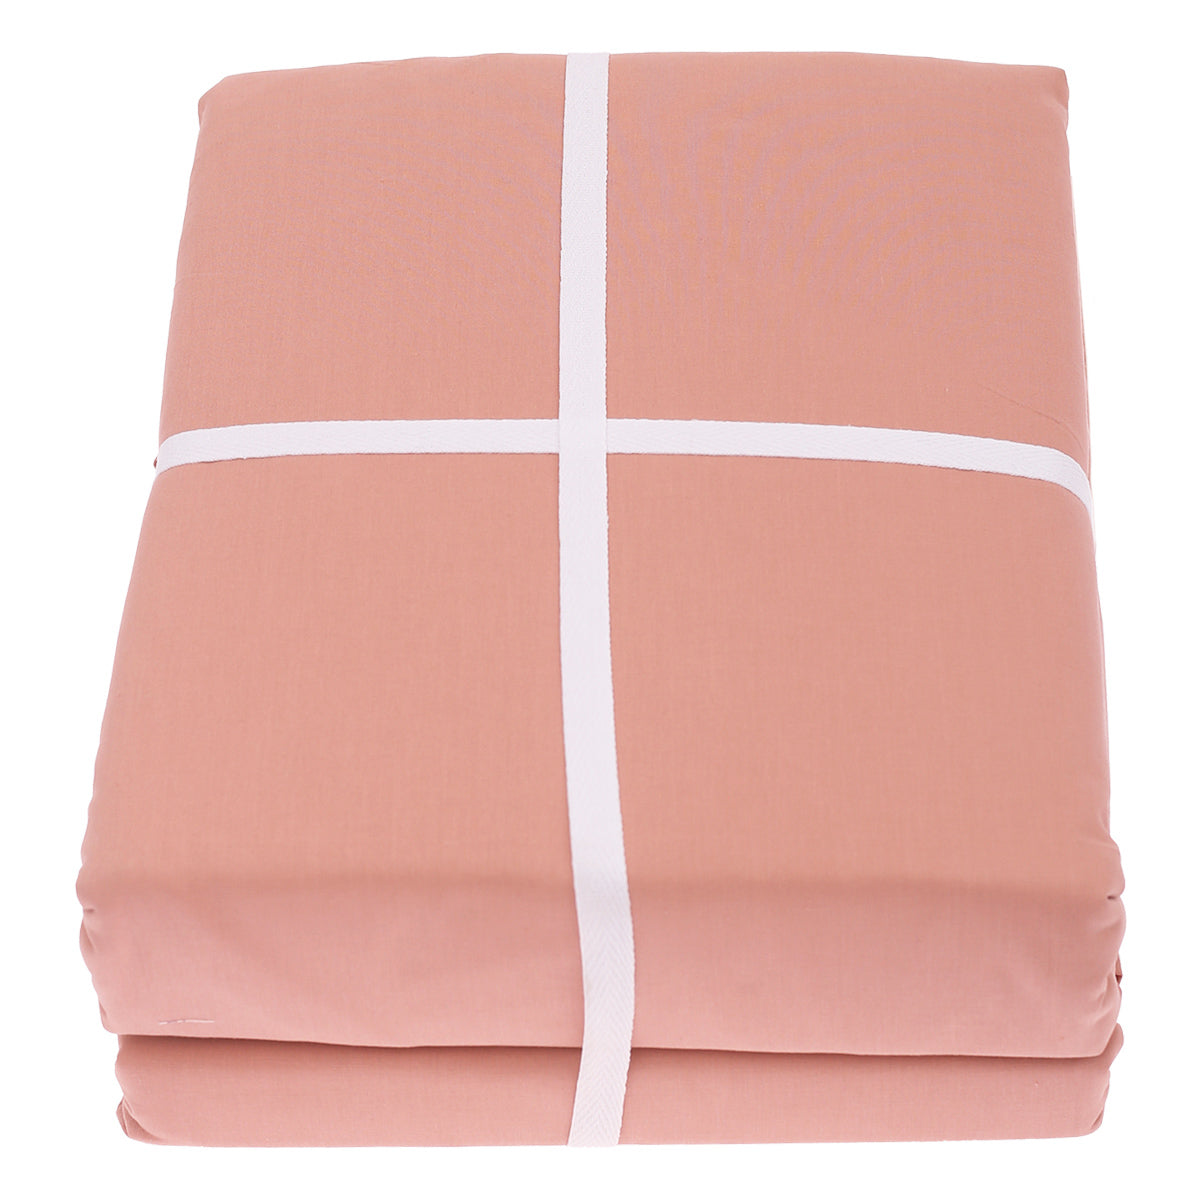 Peach Dyed Double Bedding Set of 6